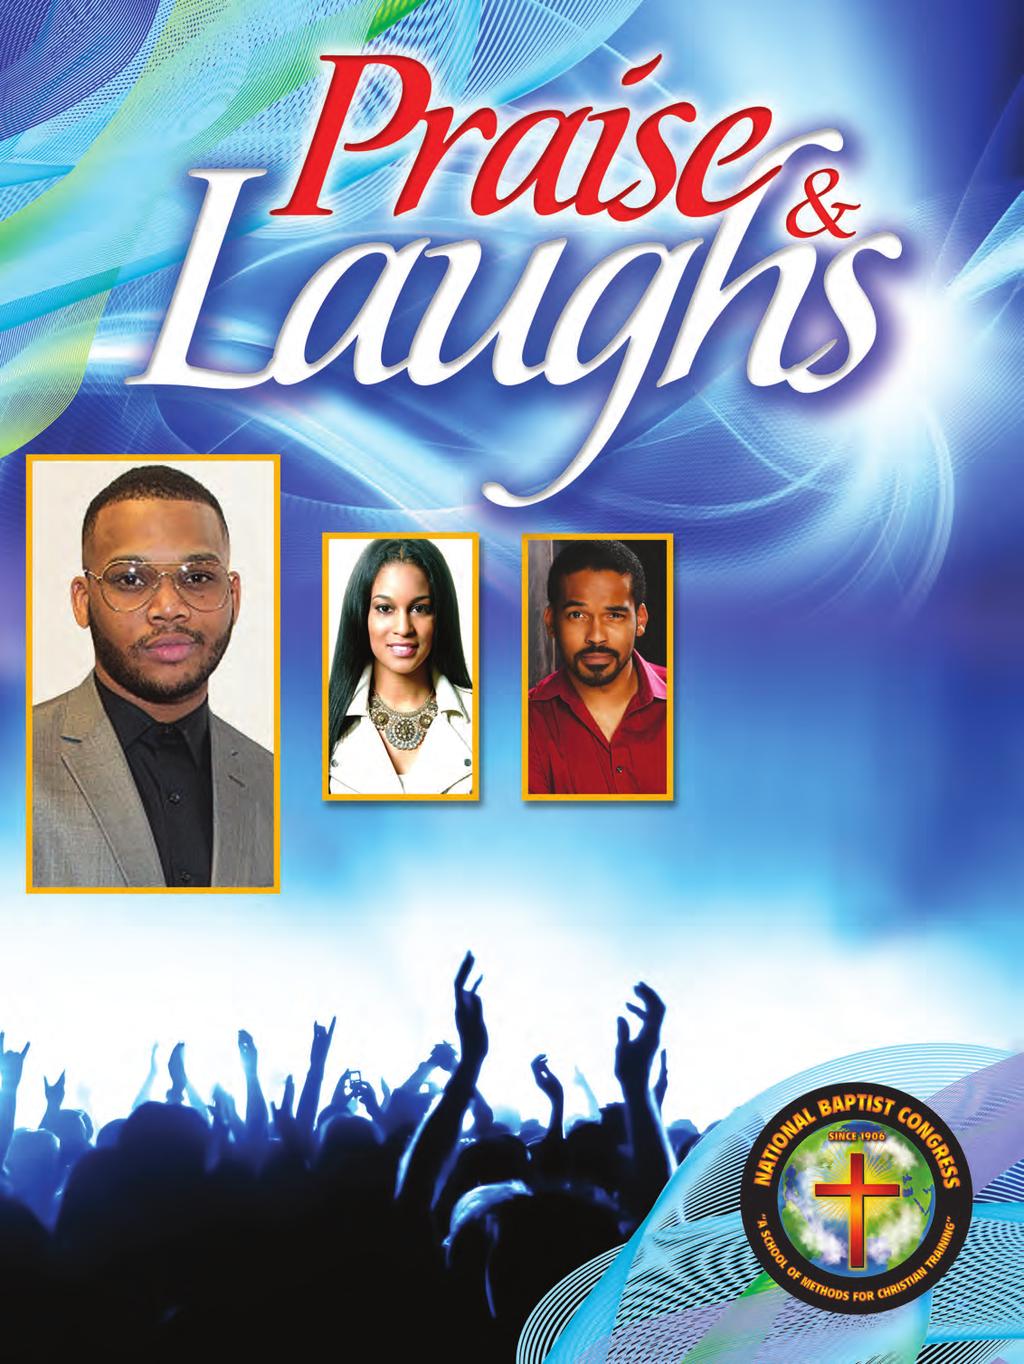 Karlton Humes Comedian Hosted by LaDonna Boyd, Chief Operating Officer Co-hosted by Justin Boyd, Social Media Coordinator CHRISTIAN CONCERT & COMEDY SHOW SHOW Wednesday, June 15, 2016 7:30 p.m. 9:00 p.